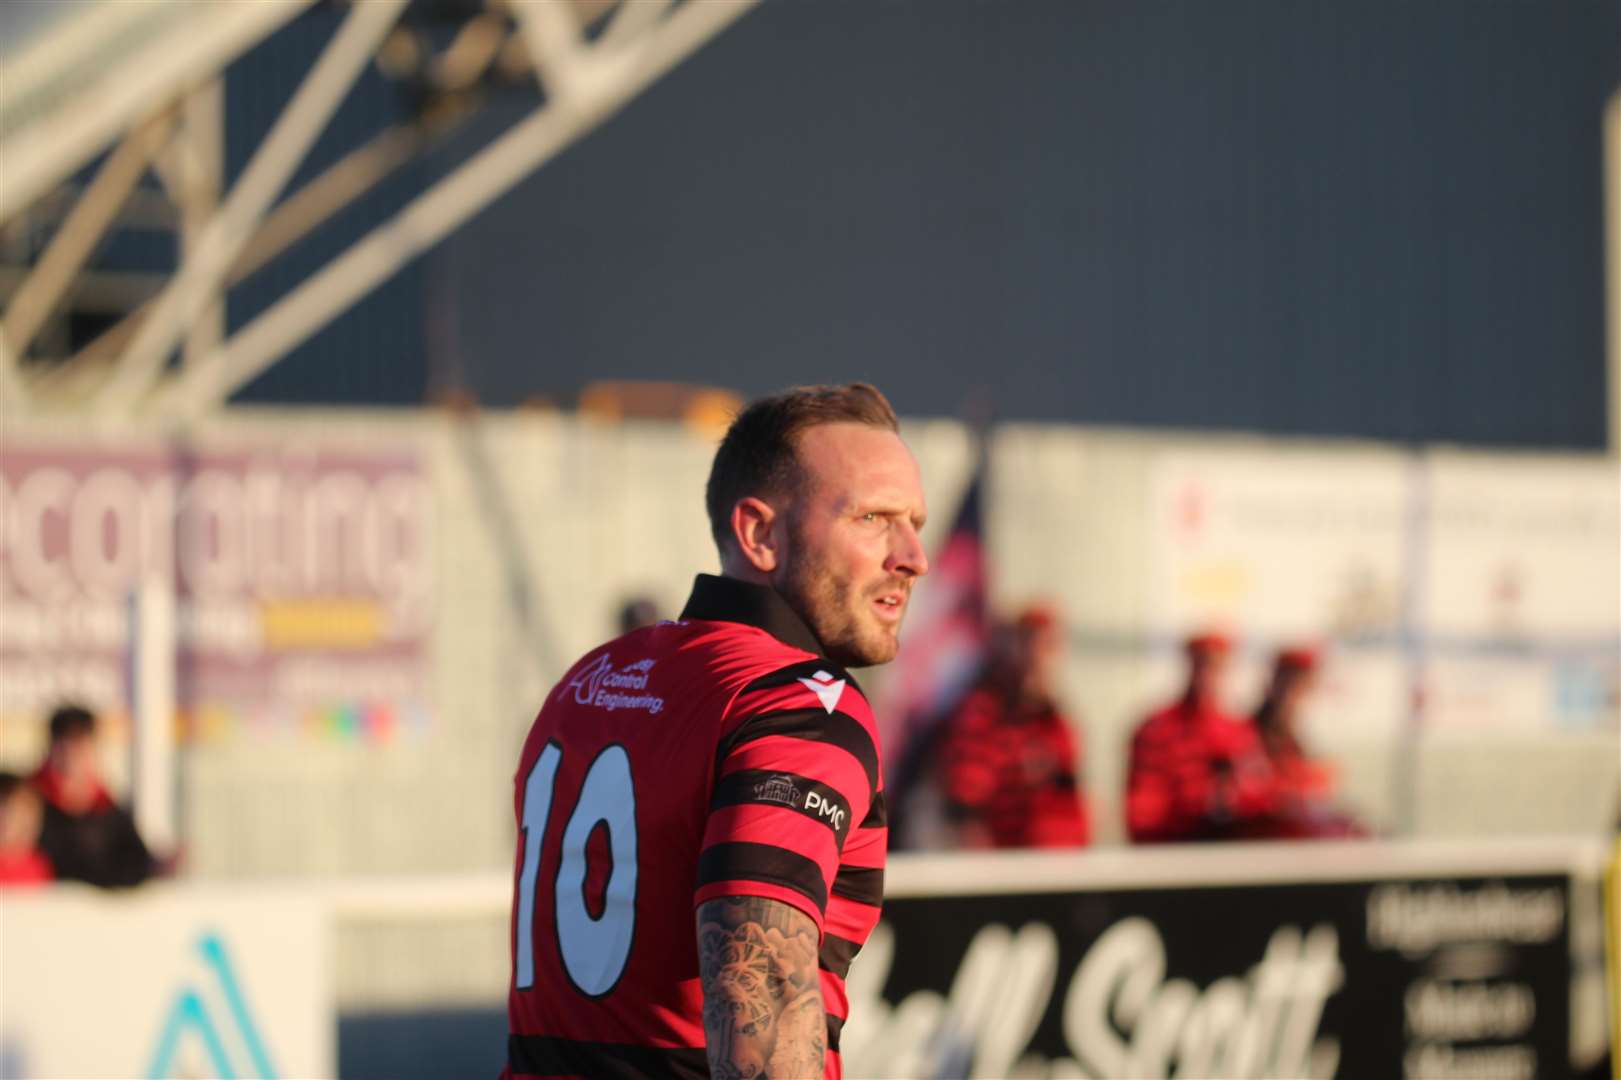 Jonny Smith came on as a second half substitute in Saturday's match against Fraserburgh.